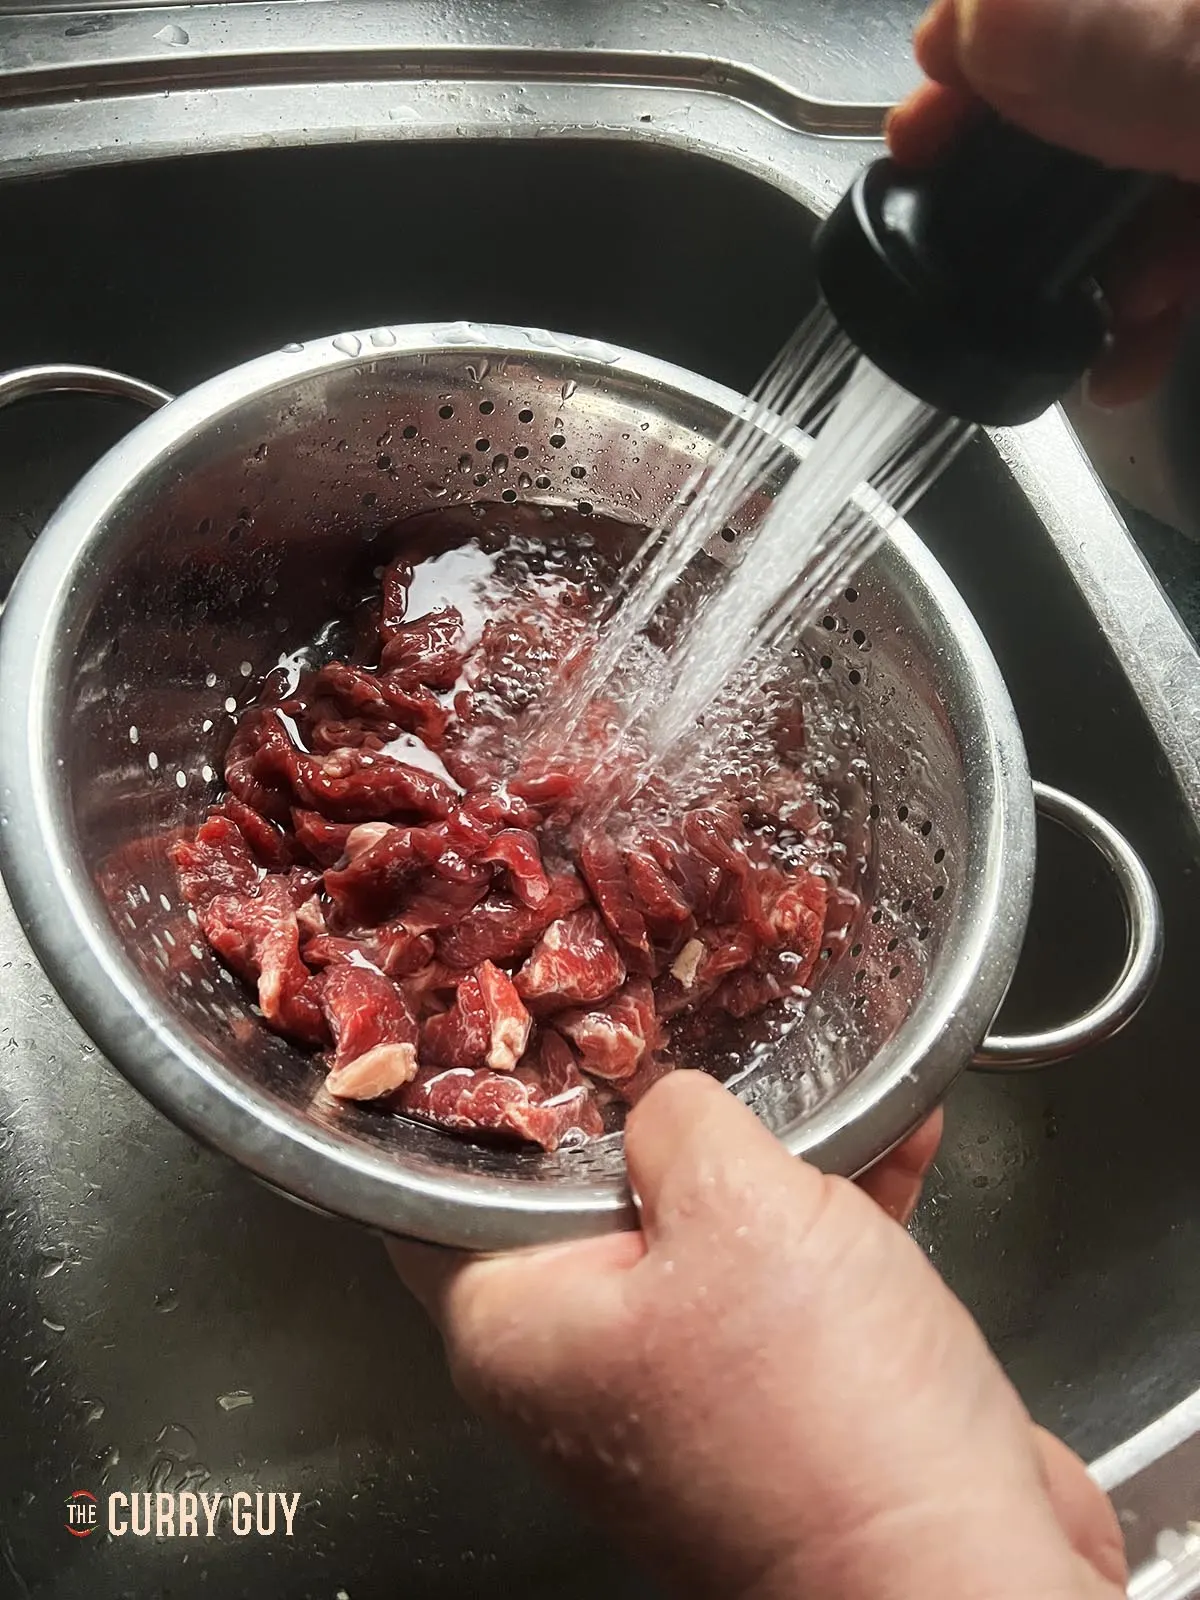 Washing the bicarbonate of soda (baking soda) off the meat.